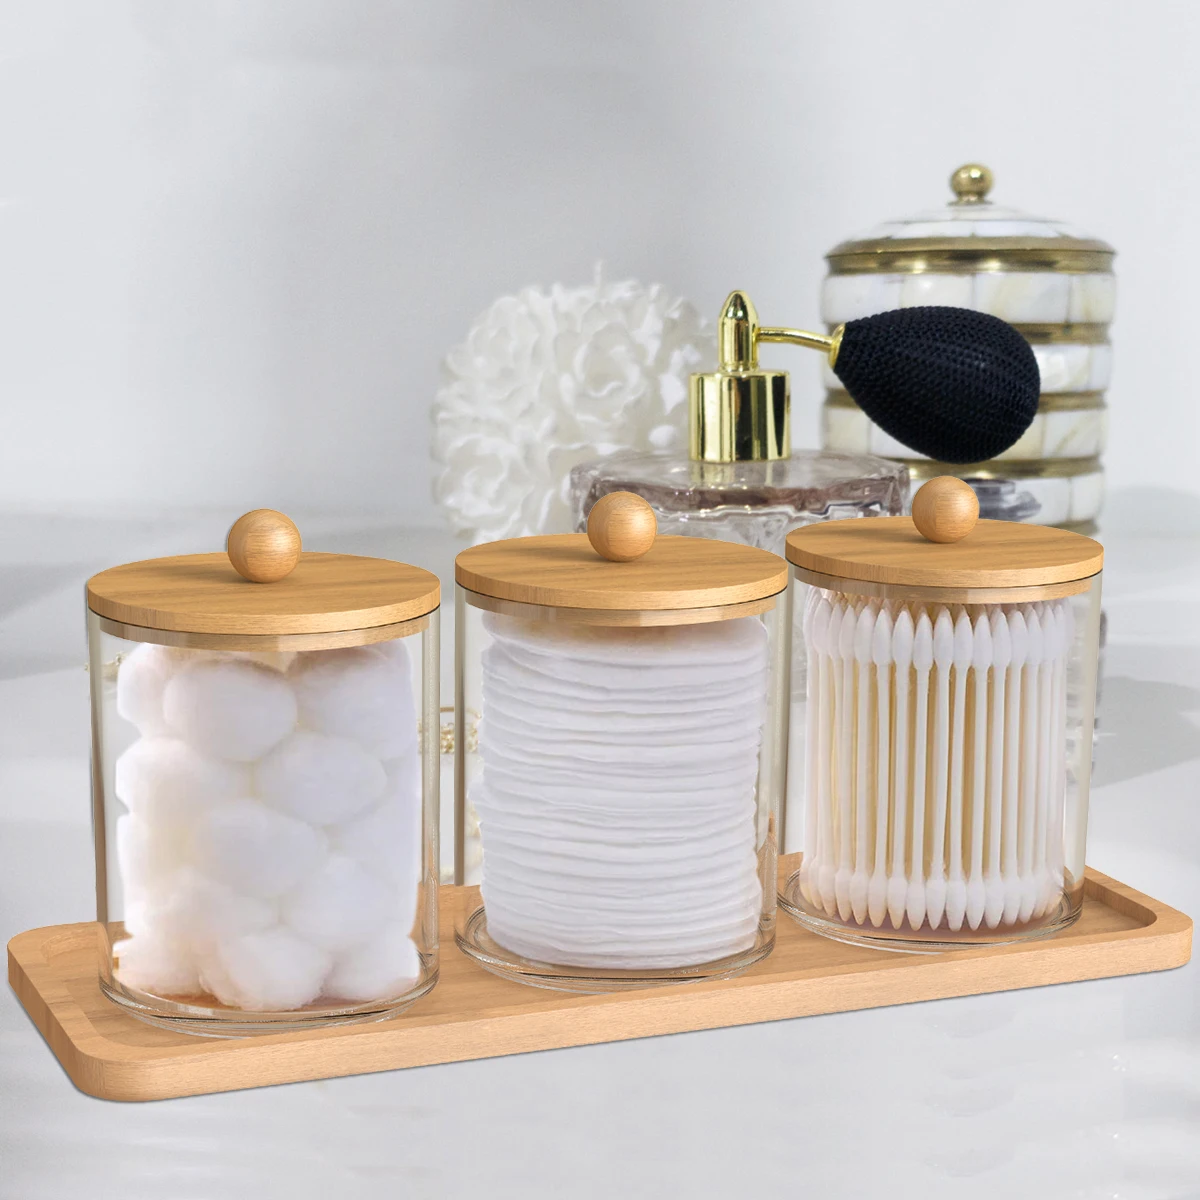 

Clear Reusable Acrylic Swab Holder Bamboo Cotton Lids Storage Dispenser With With Dispenser 3pcs Bathroom Tray Jars Qtip